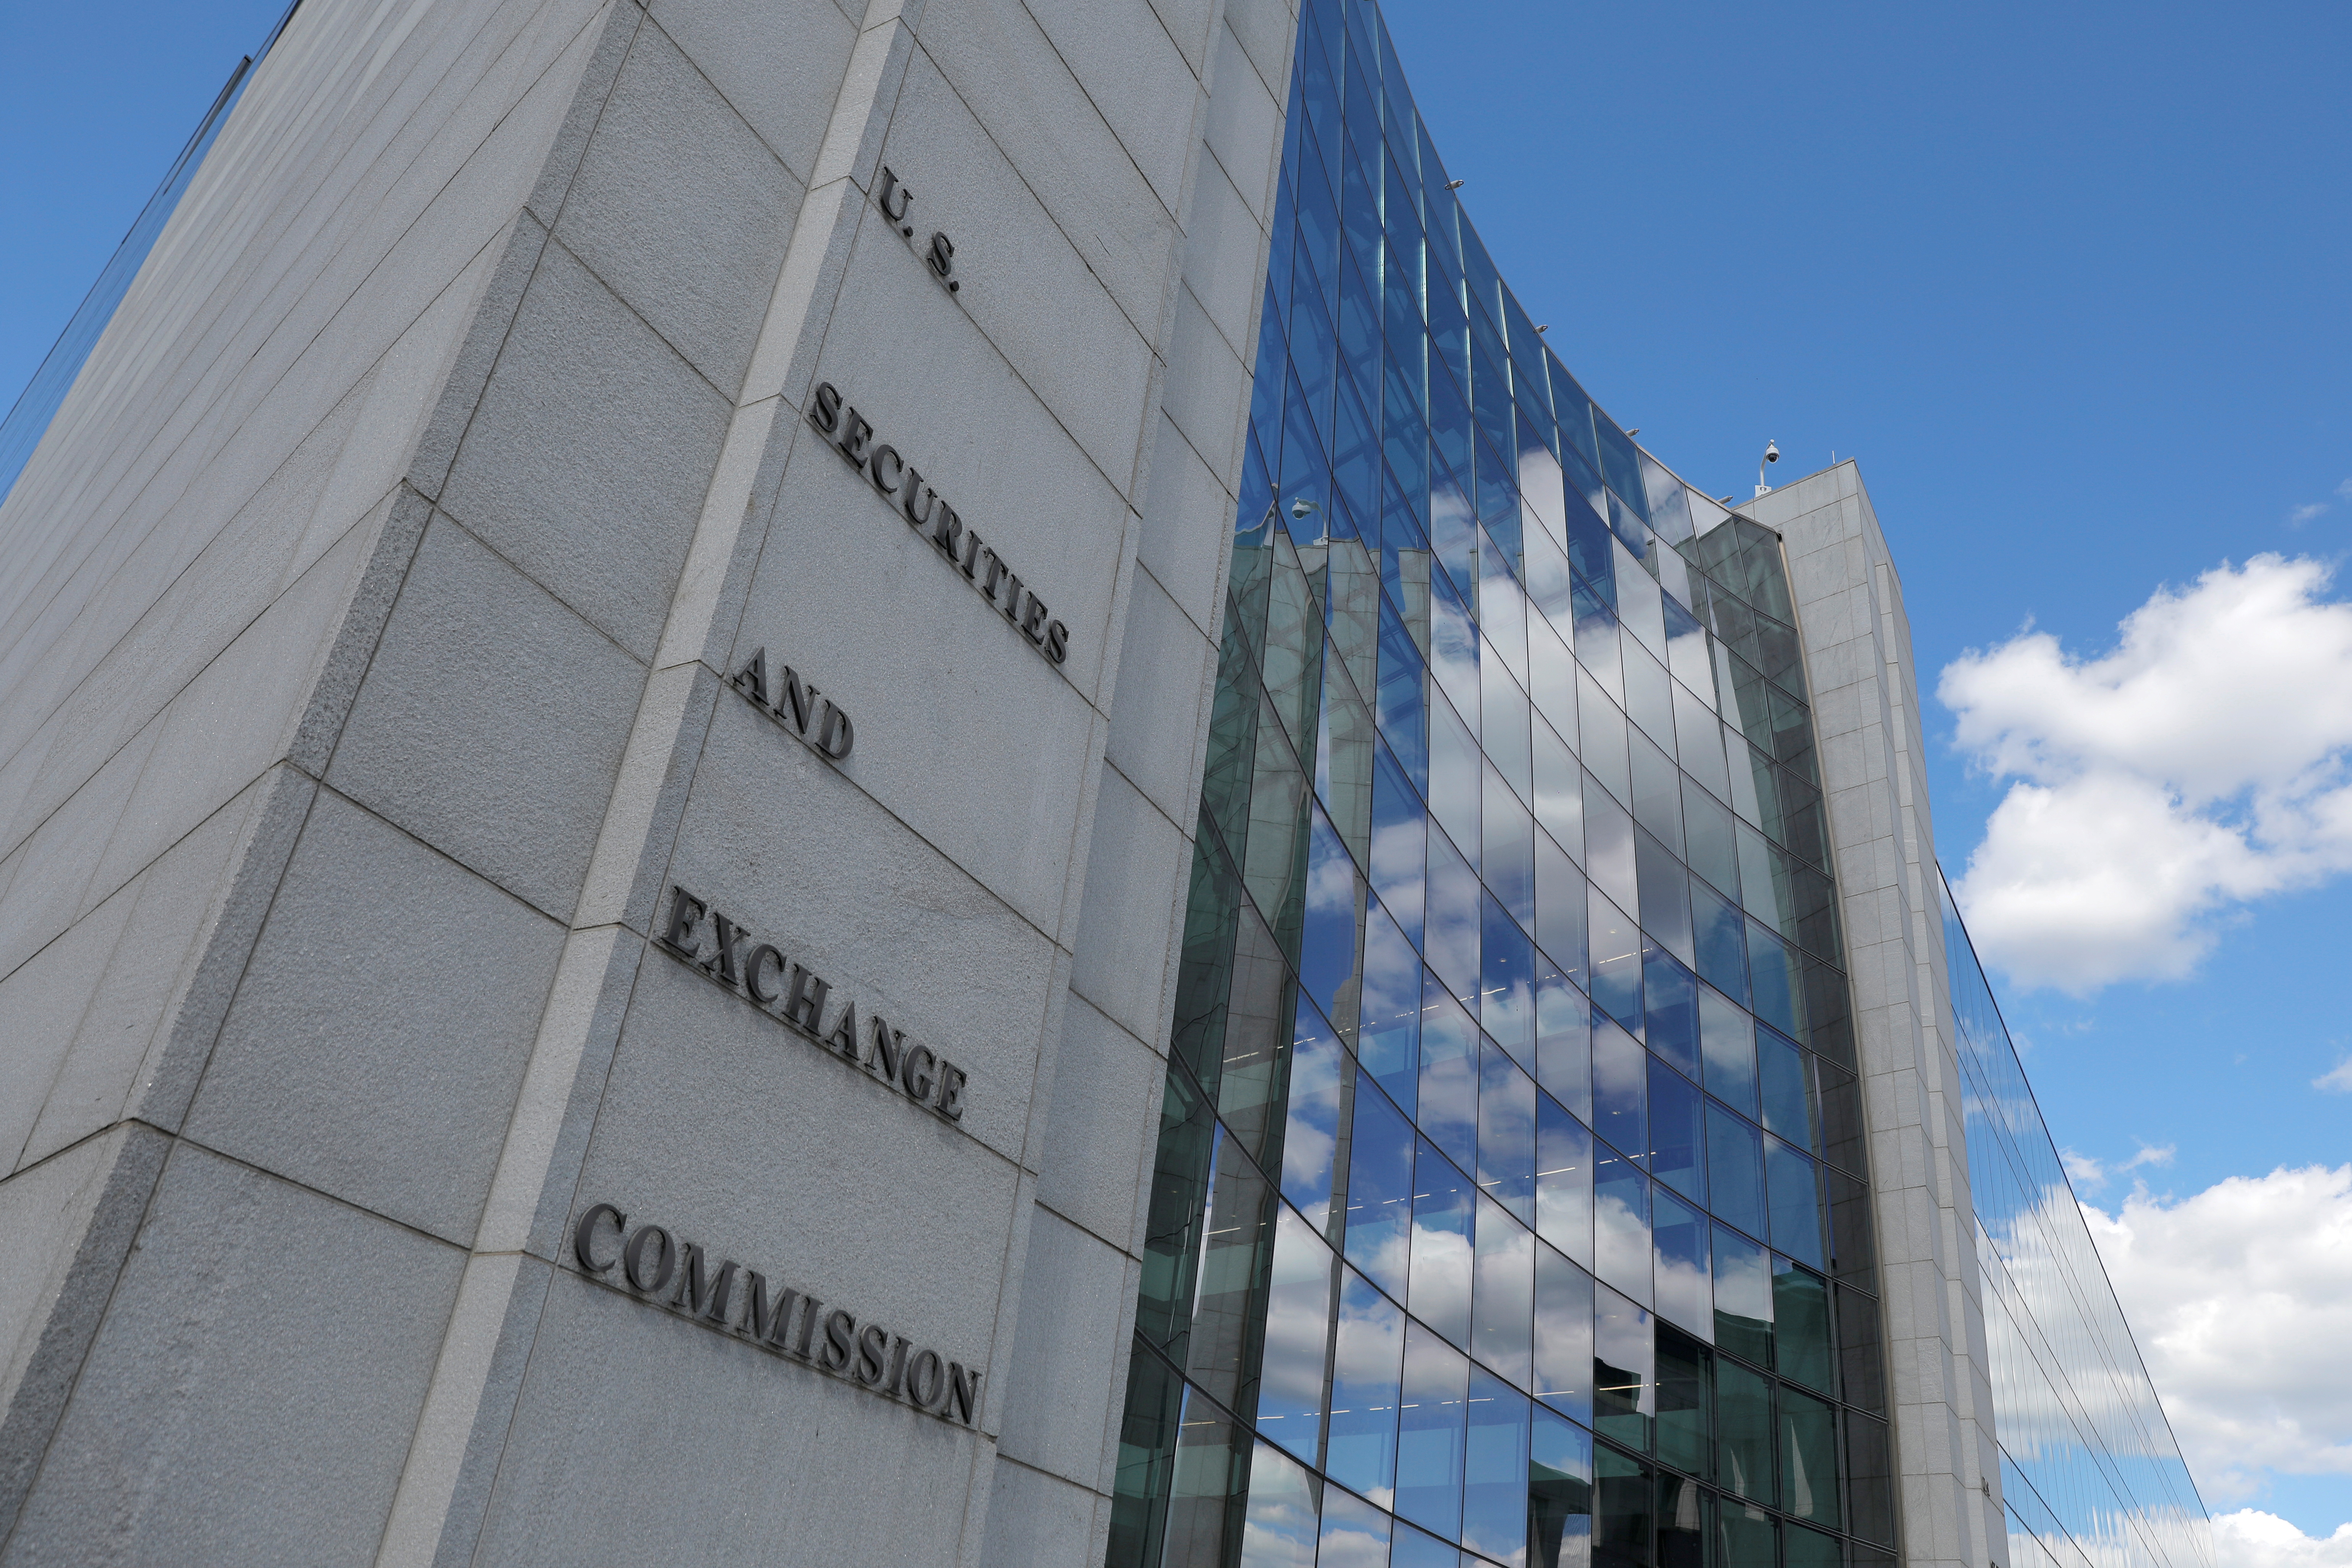 Signage is seen at the headquarters of the U.S. Securities and Exchange Commission (SEC) in Washington, D.C.